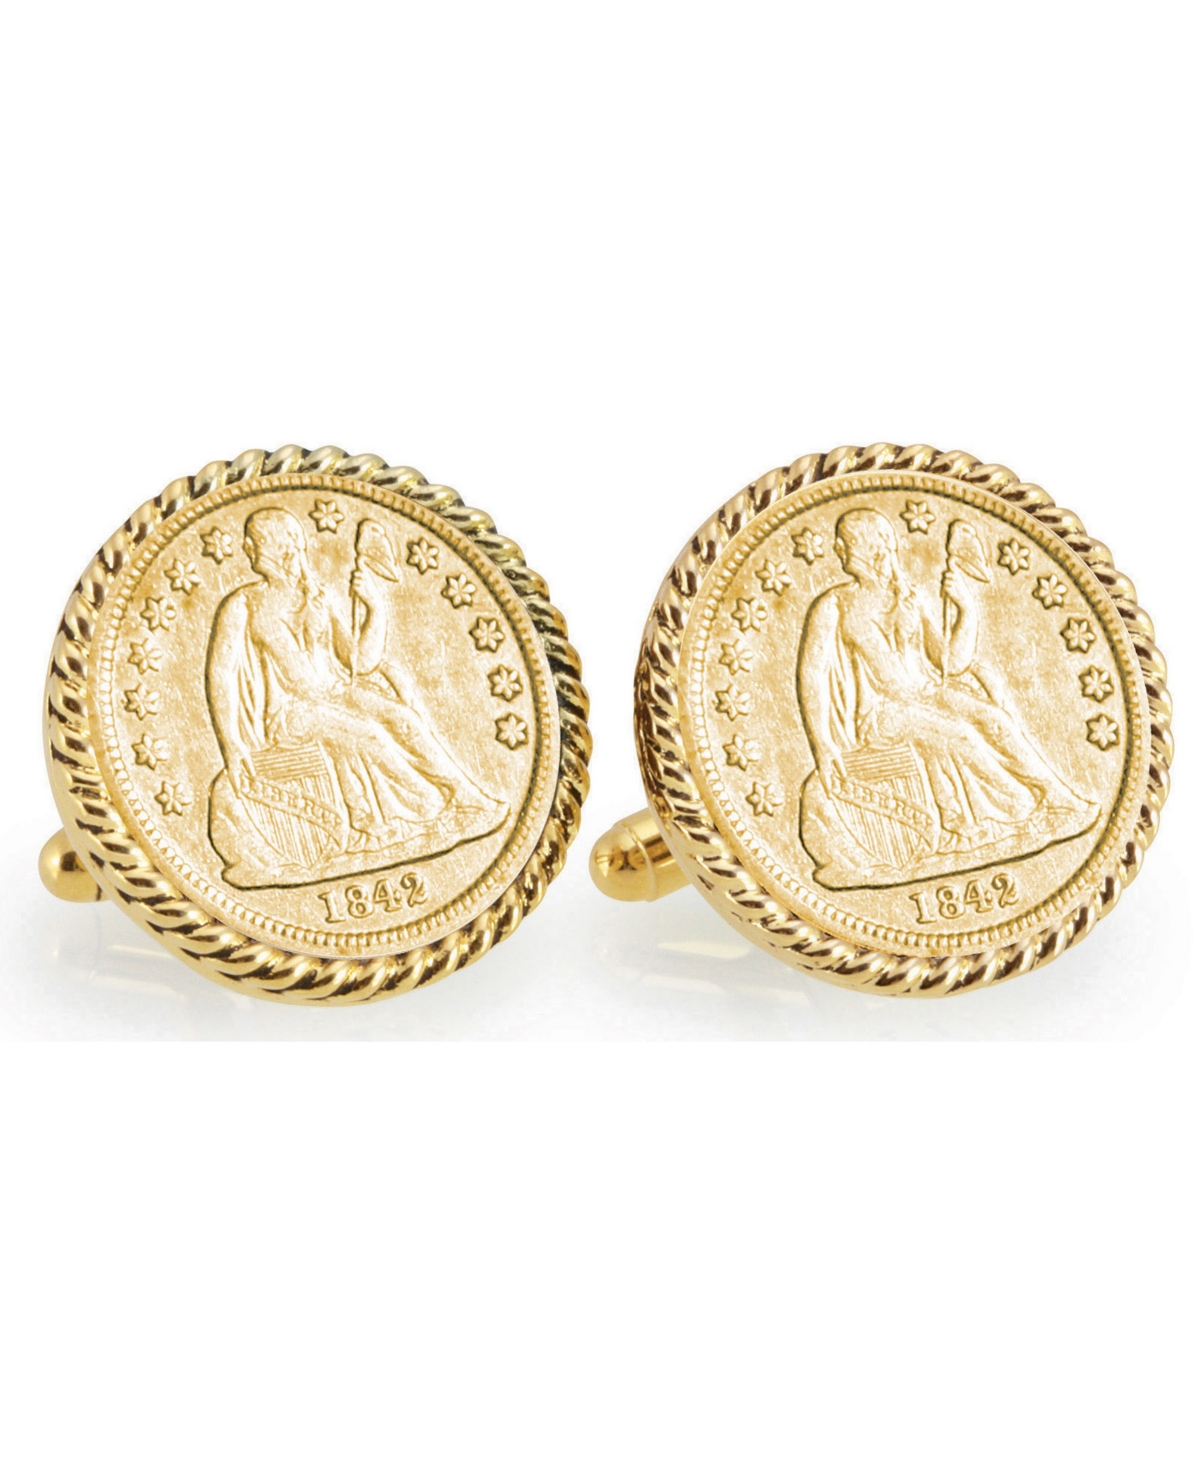 Gold-Layered Seated Liberty Silver Dime Rope Bezel Coin Cuff Links - Gold